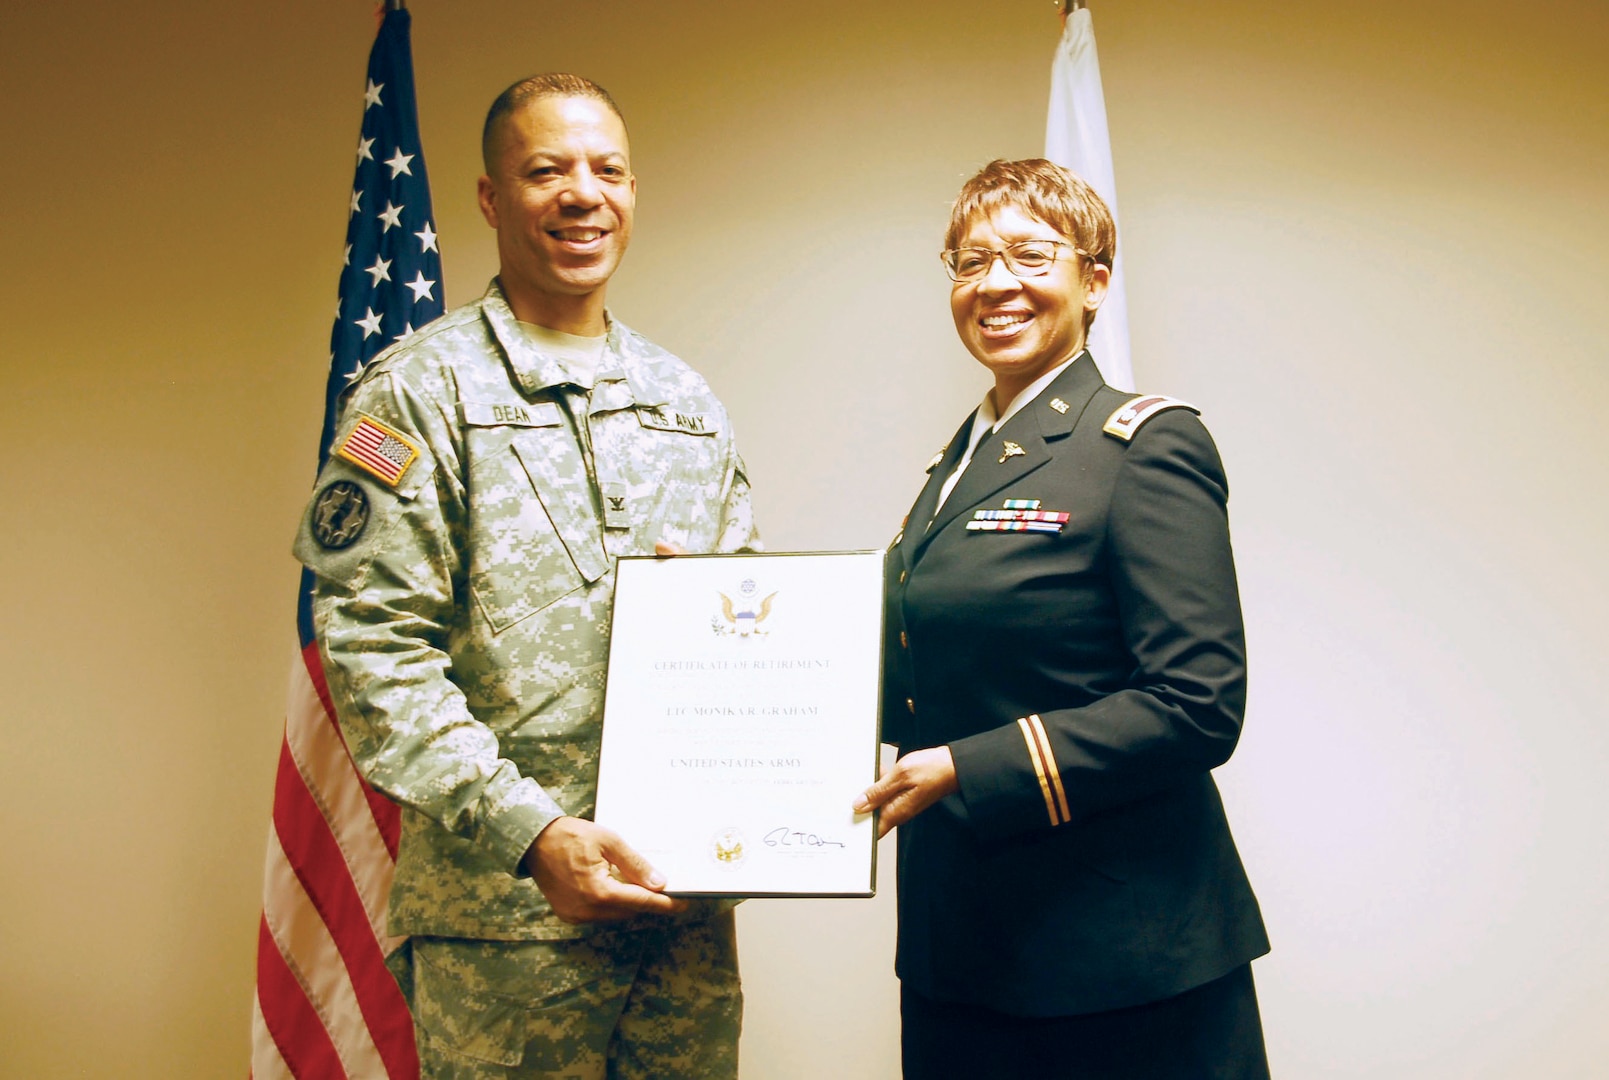 District of Columbia Army National Guard (DCNG), Lt. Col. Monika R. Graham, medical detachment commander is presented a certificate of retirement by the DCNG Chief of Staff, Col. Aaron R. Dean during her retirement ceremony, DC Armory, Washington, Feb. 21. Graham received several awards for 27 years of distinguished service and countless achievements through her career to include the Legion of Merit and the DCNG Meritorious Service Medal.